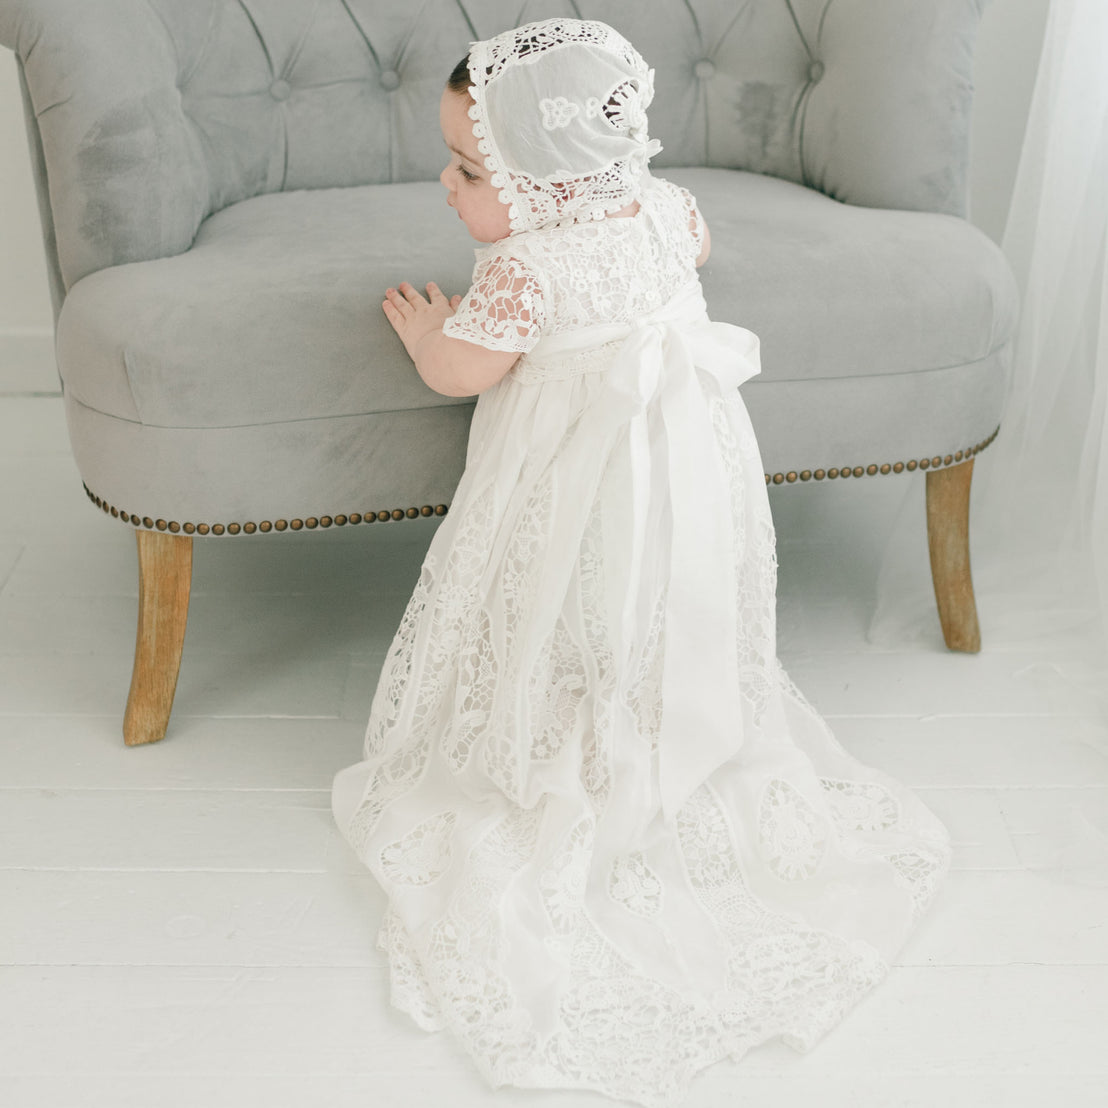 A baby wearing the Grace Christening Gown & Bonnet with a silk sash tie and Venice inset leans on a gray vintage sofa in a bright room.